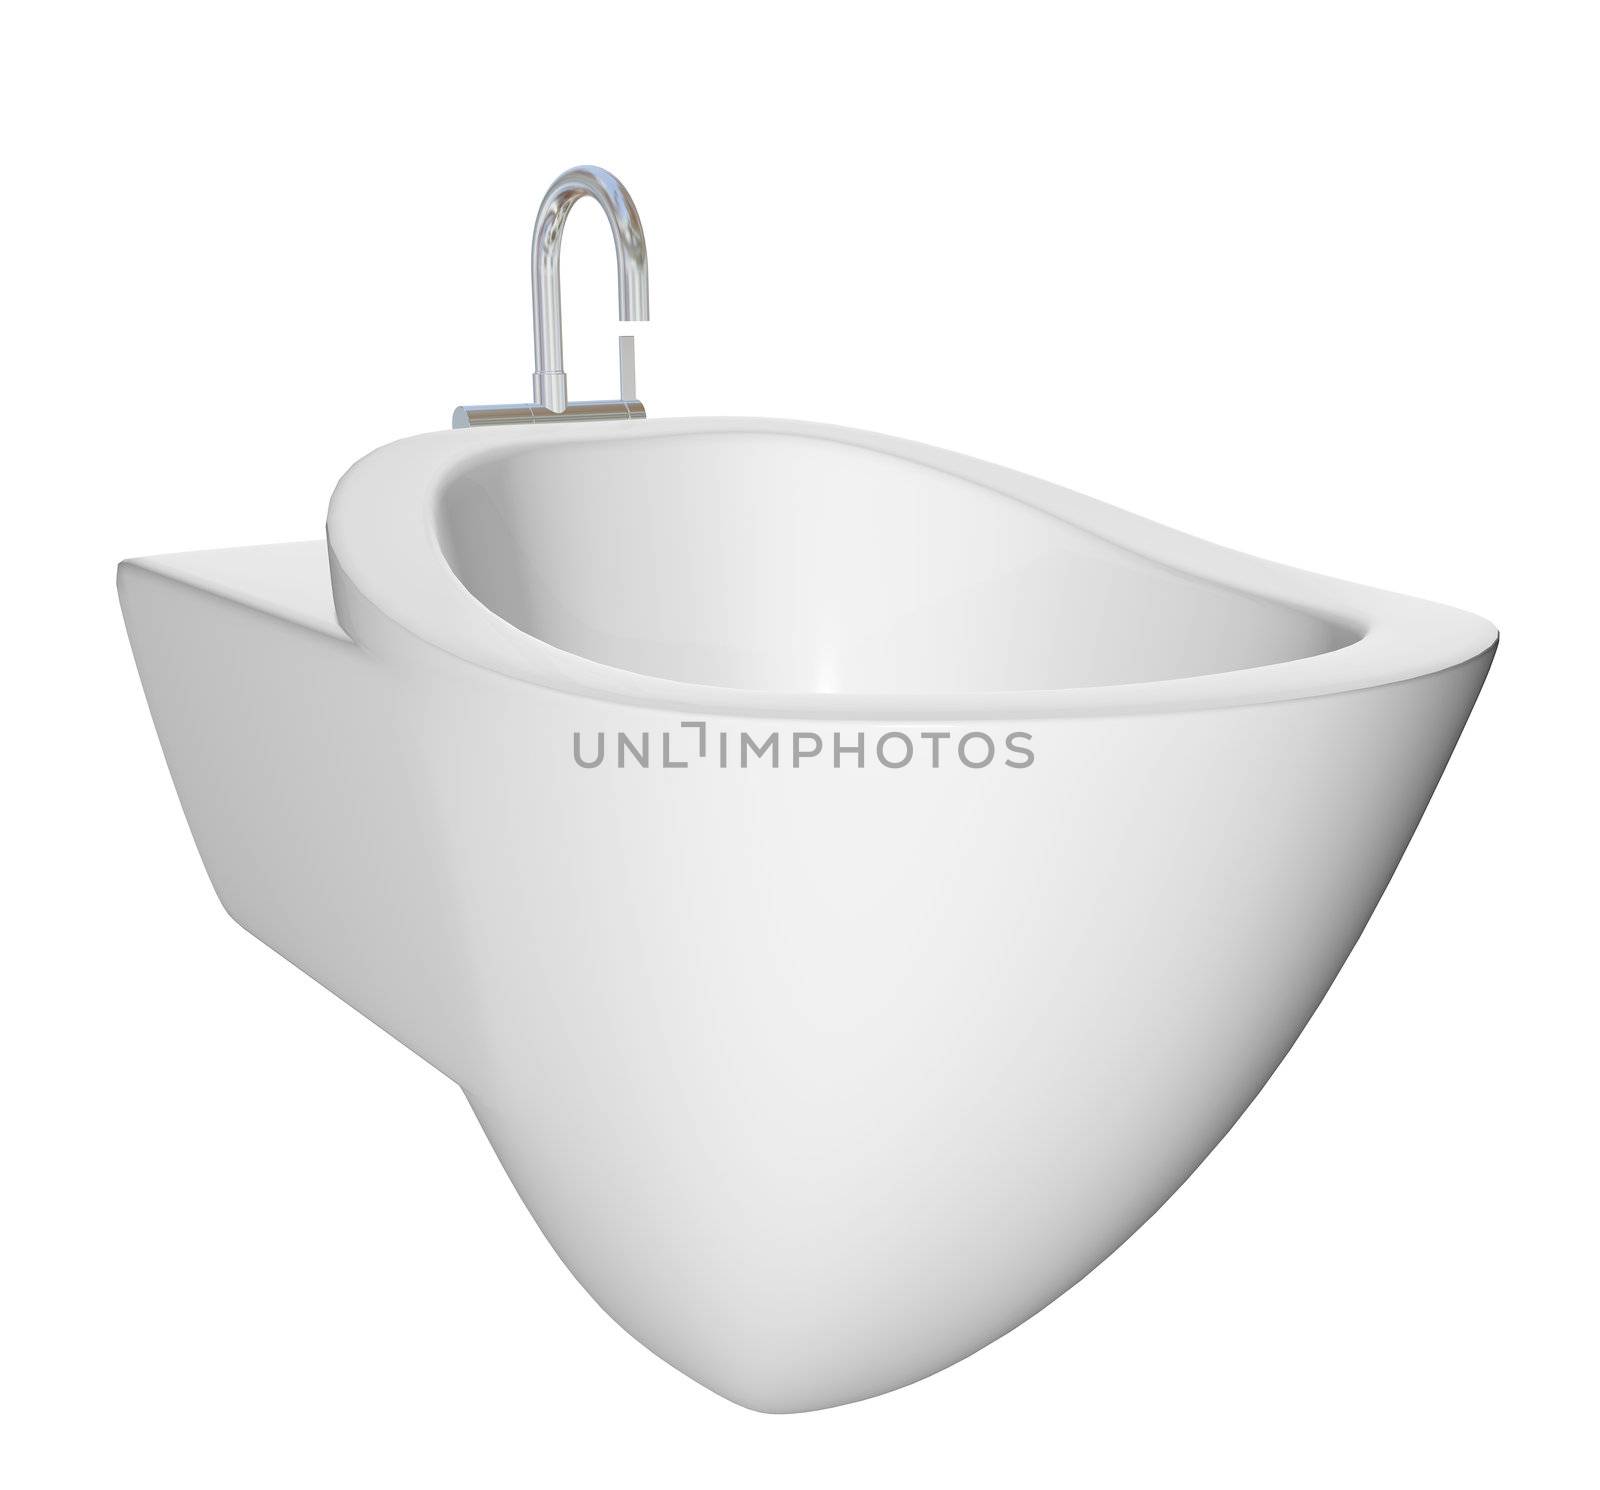 Round bidet design for bathrooms. Type of sink intended for washing the genitalia, inner buttocks, and anus. 3D illustration, isolated against a white background.